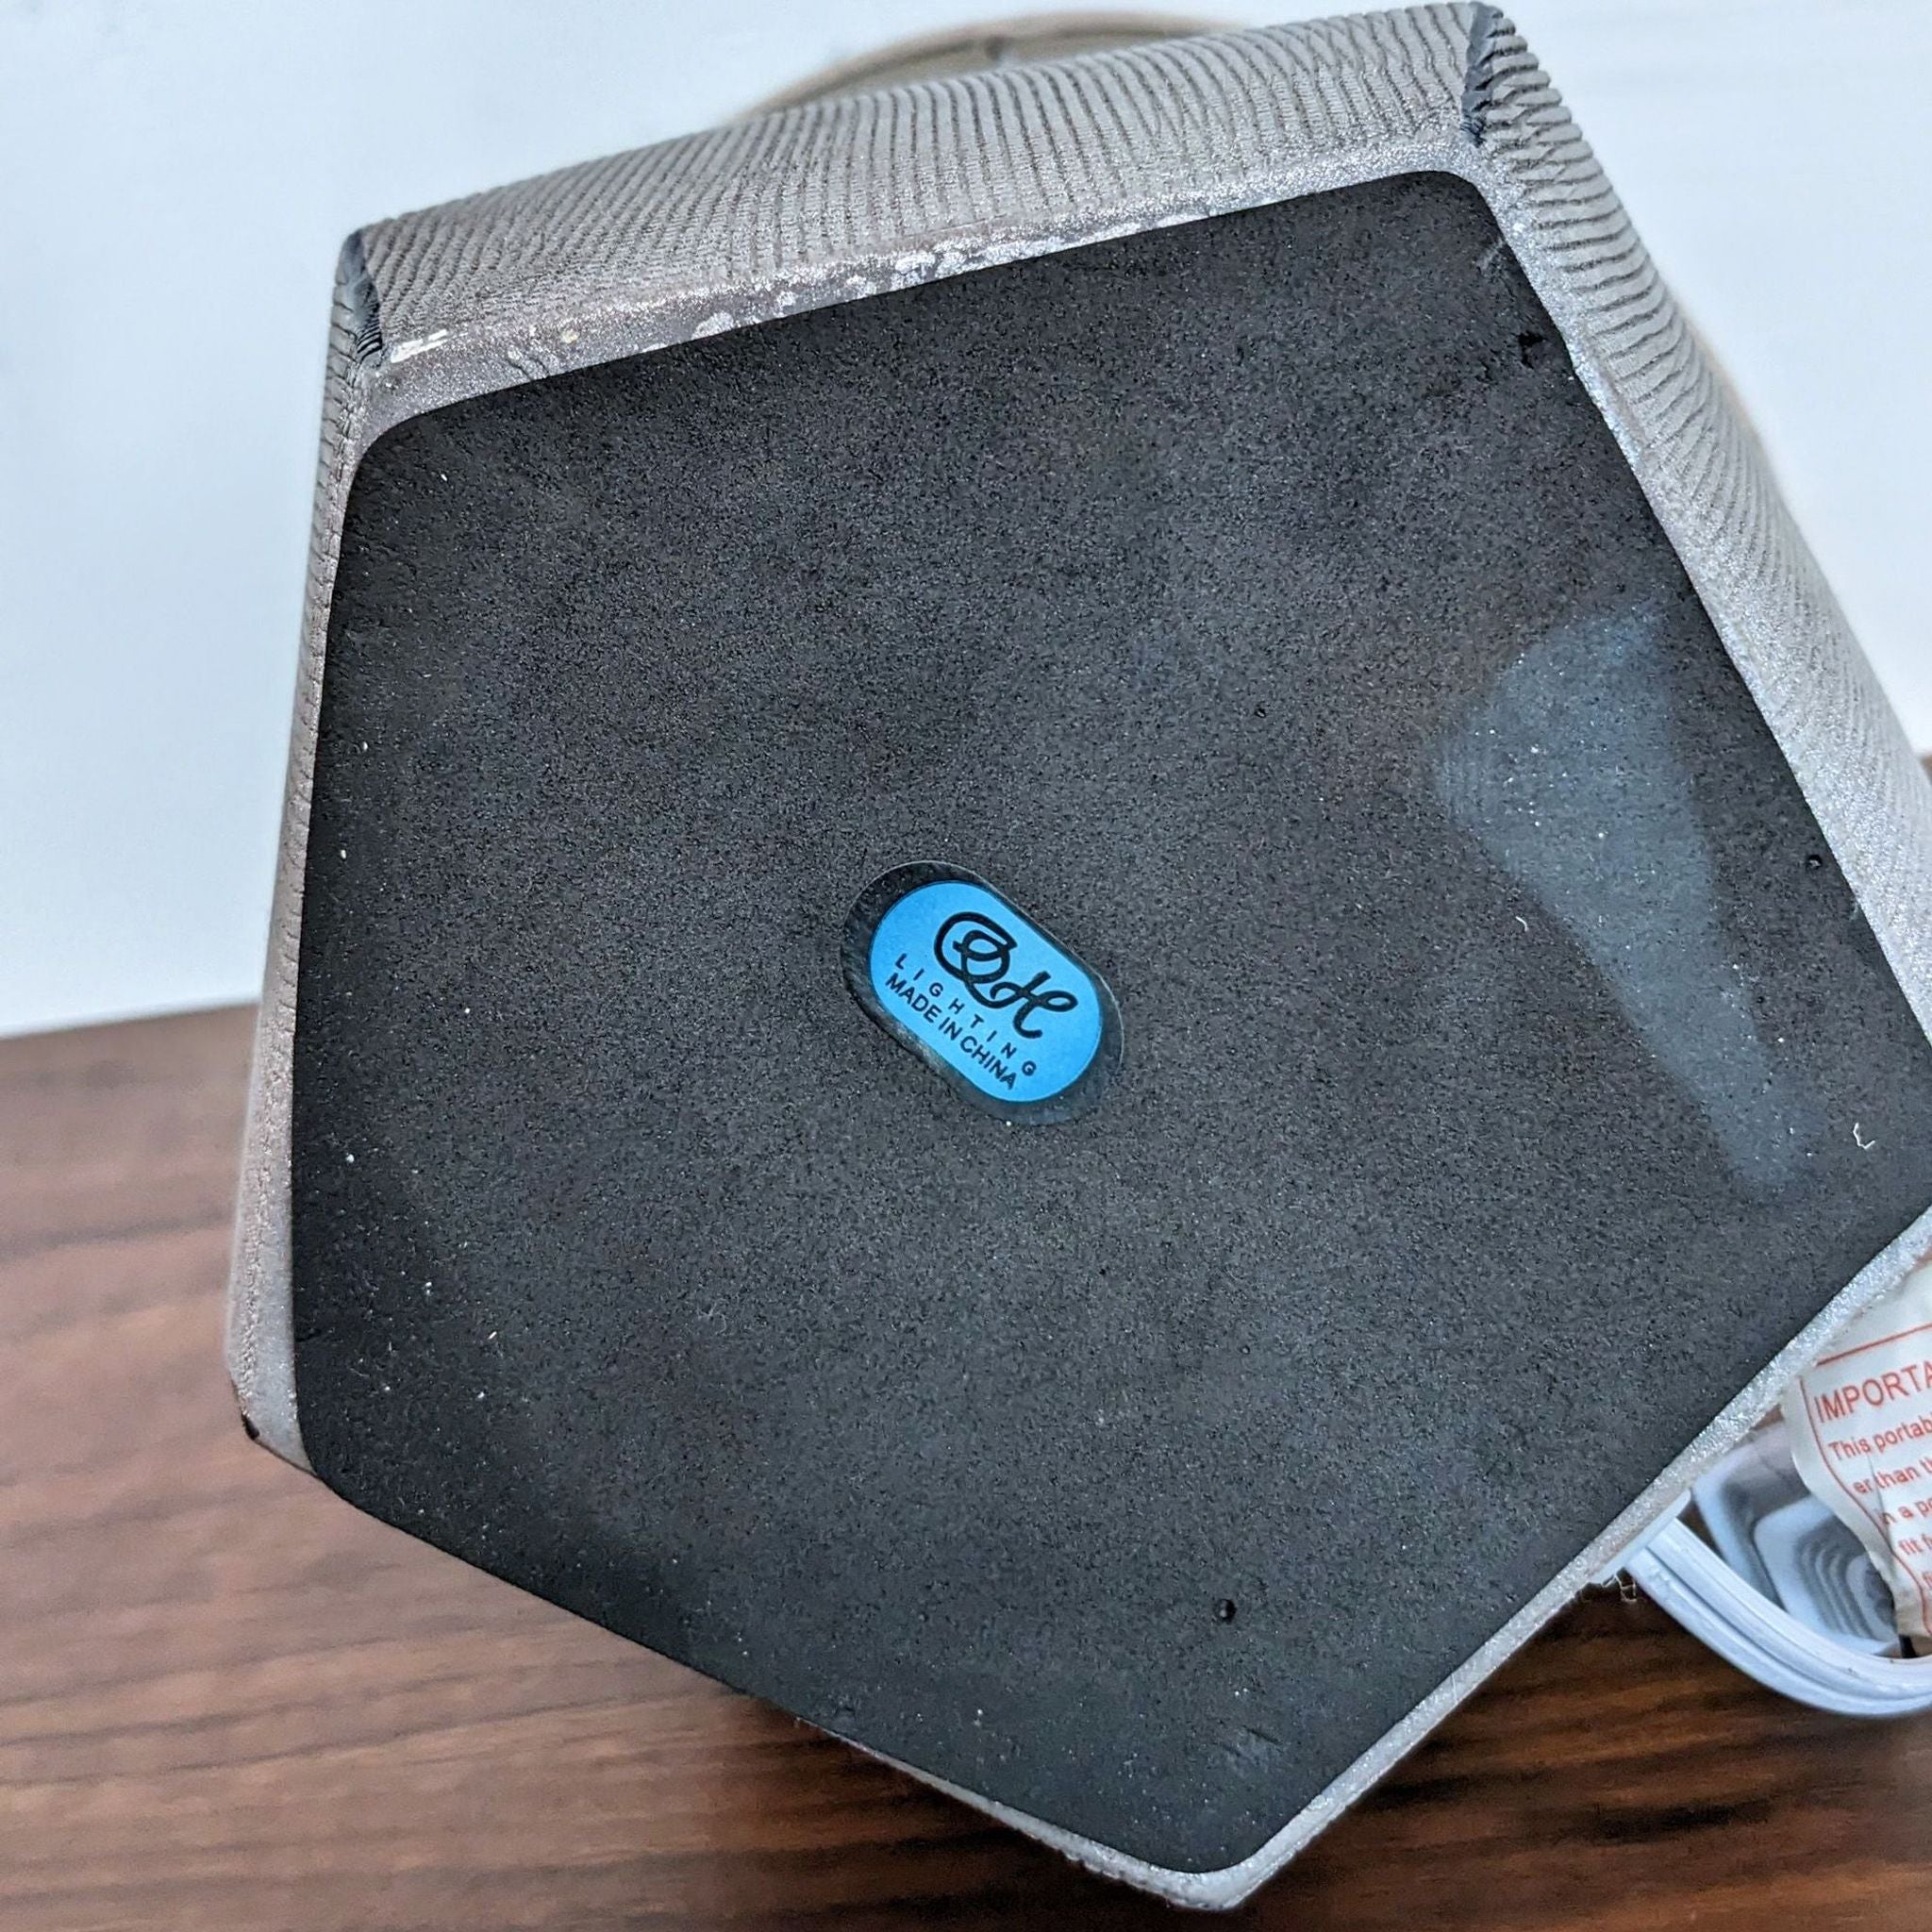 Underside view of a Reperch lamp showing brand sticker and felt padding on its geometric base.